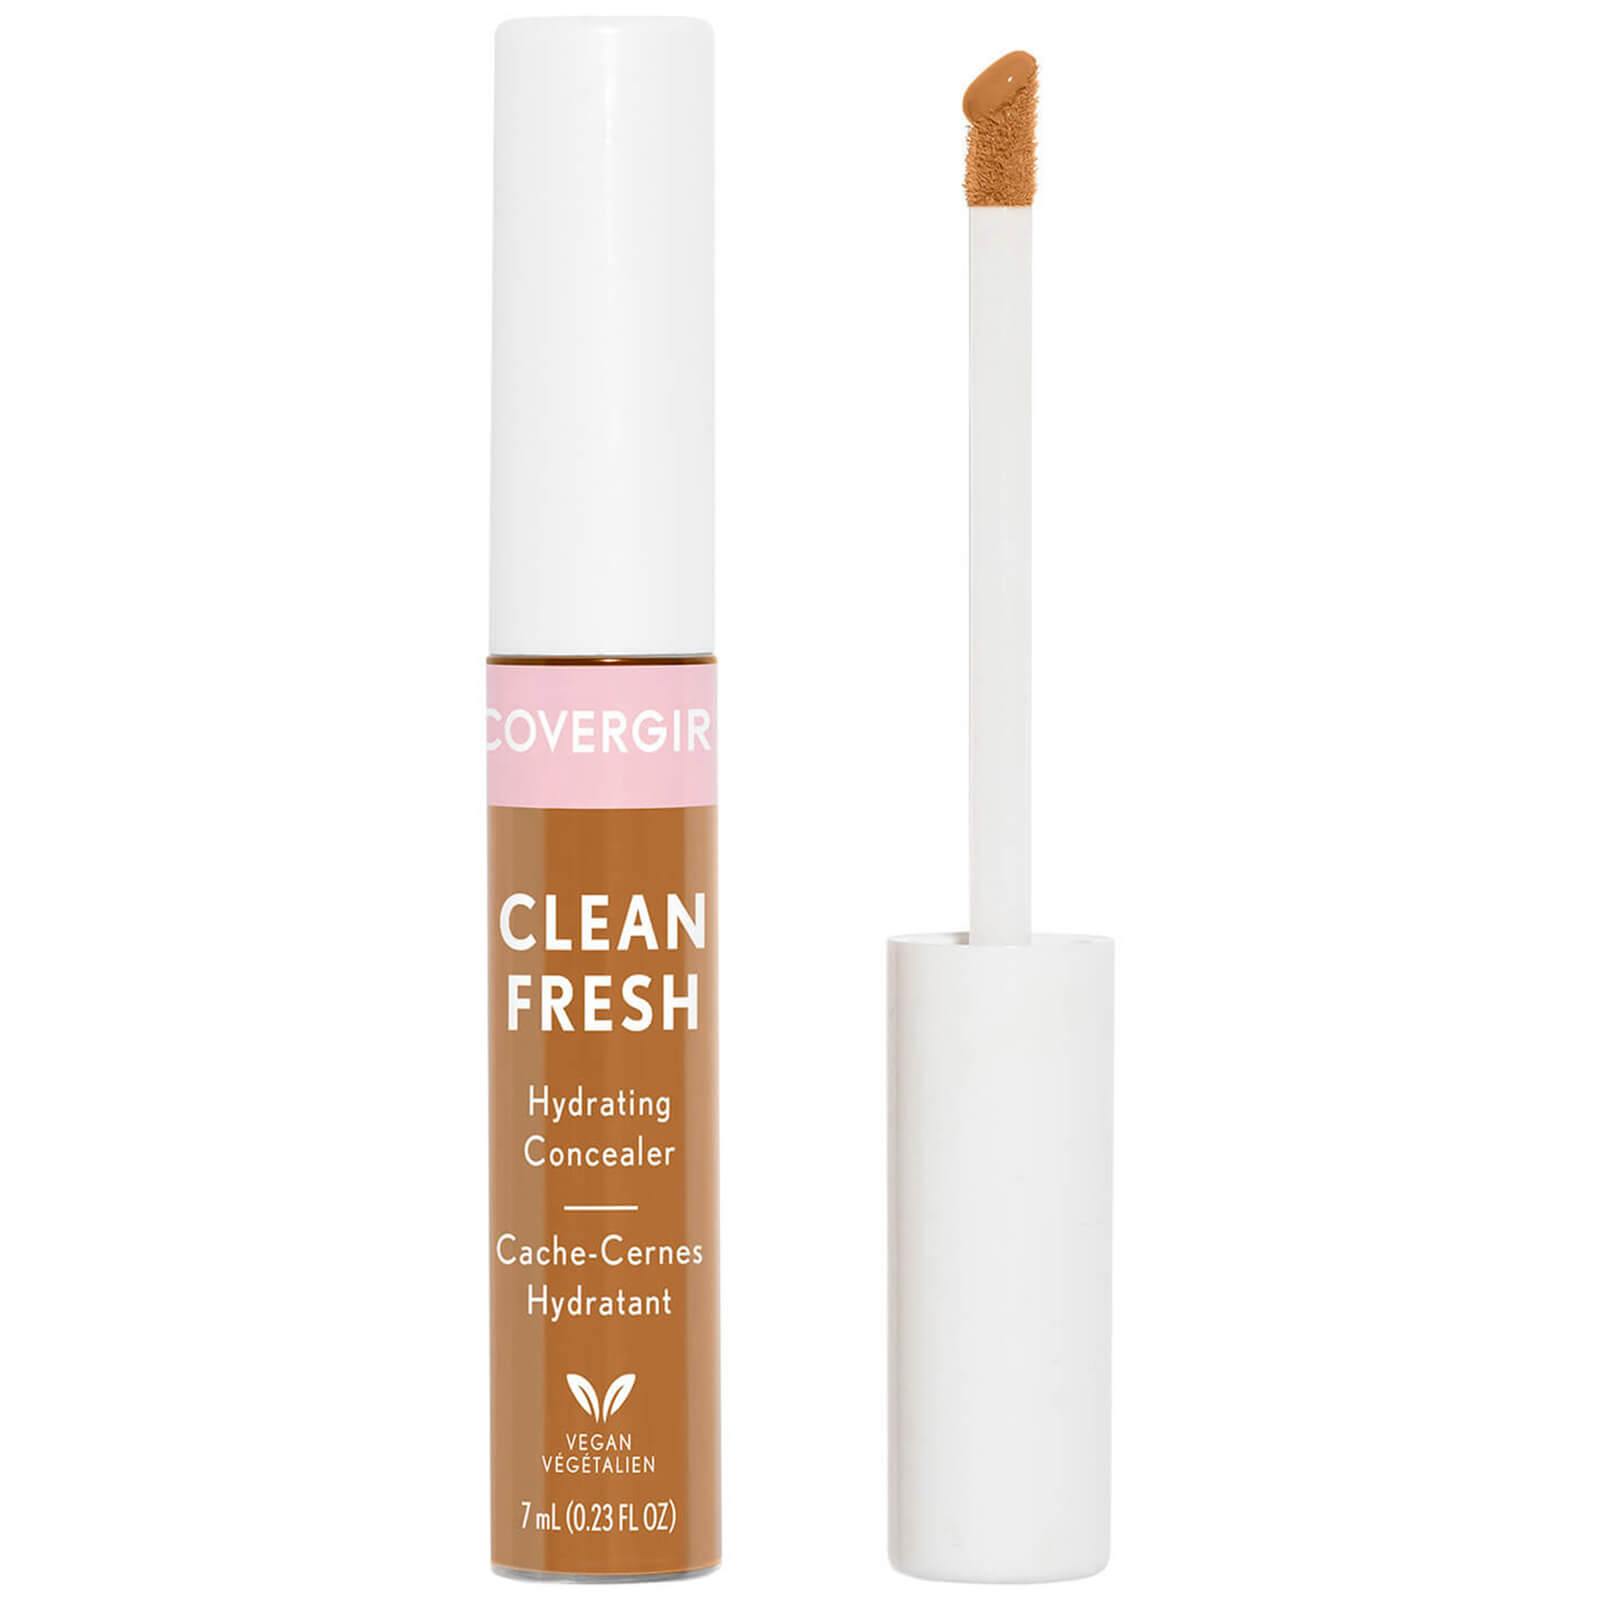 Covergirl Clean Fresh Hydrating Concealer 0.23 oz (Various Shades) - Porcelain